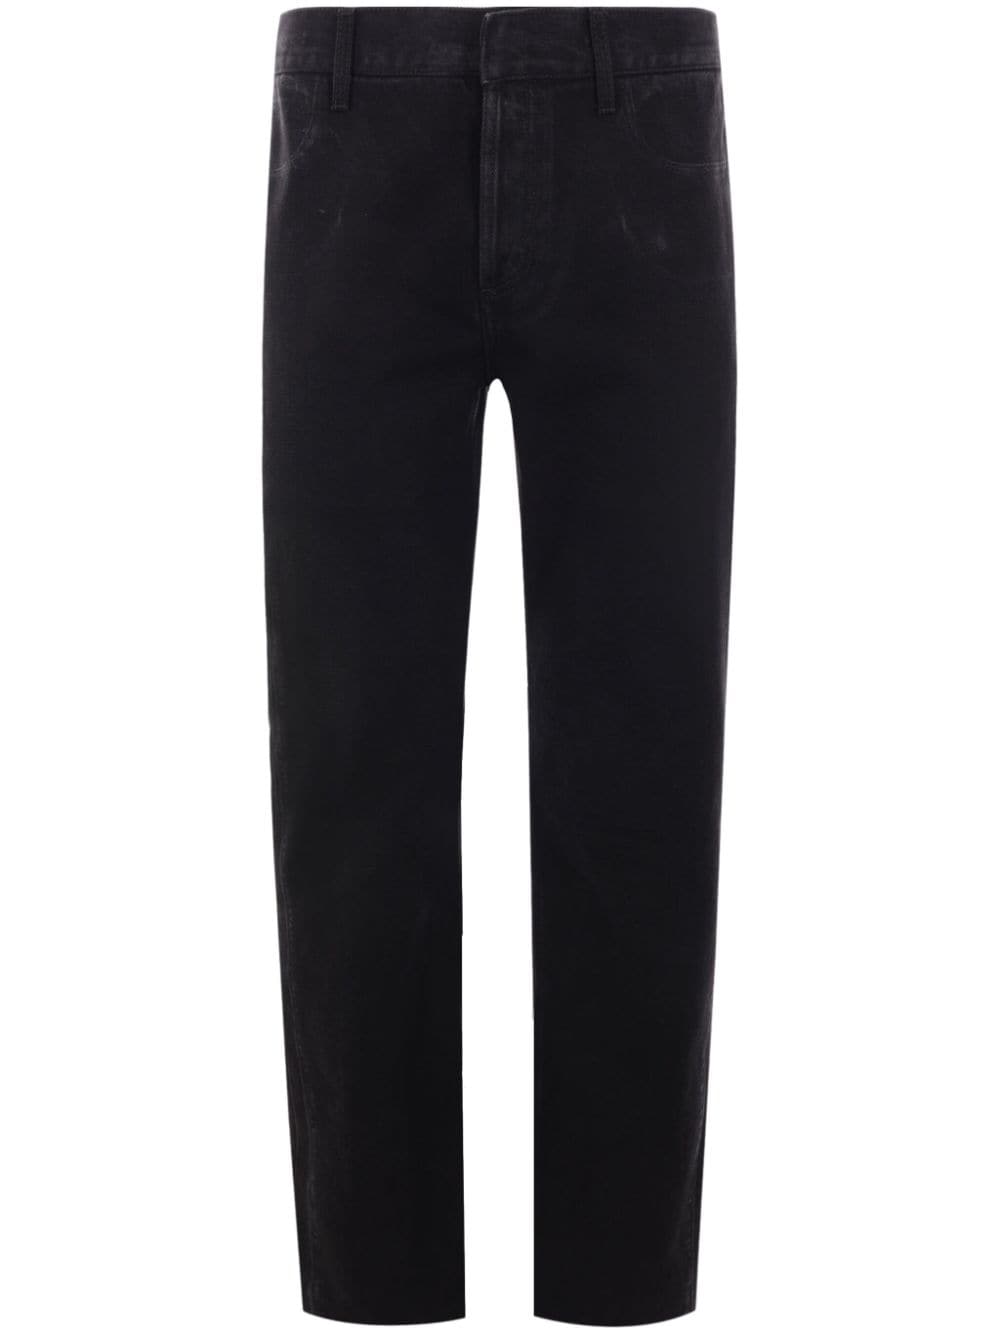 Ghostwash mid-rise straight jeans